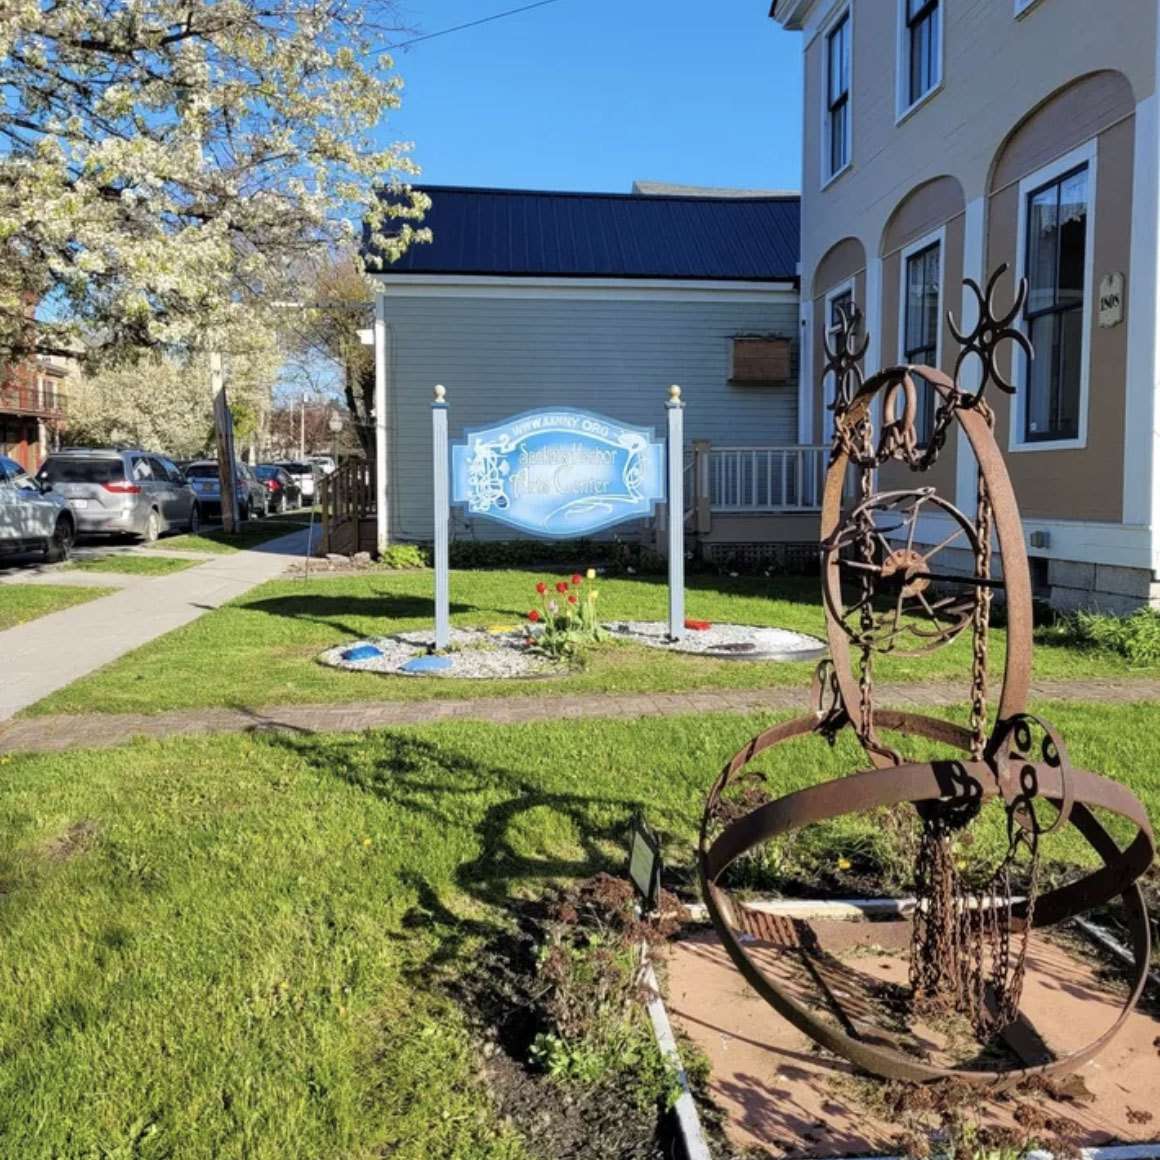 Artwork outside the AANNY Gallery